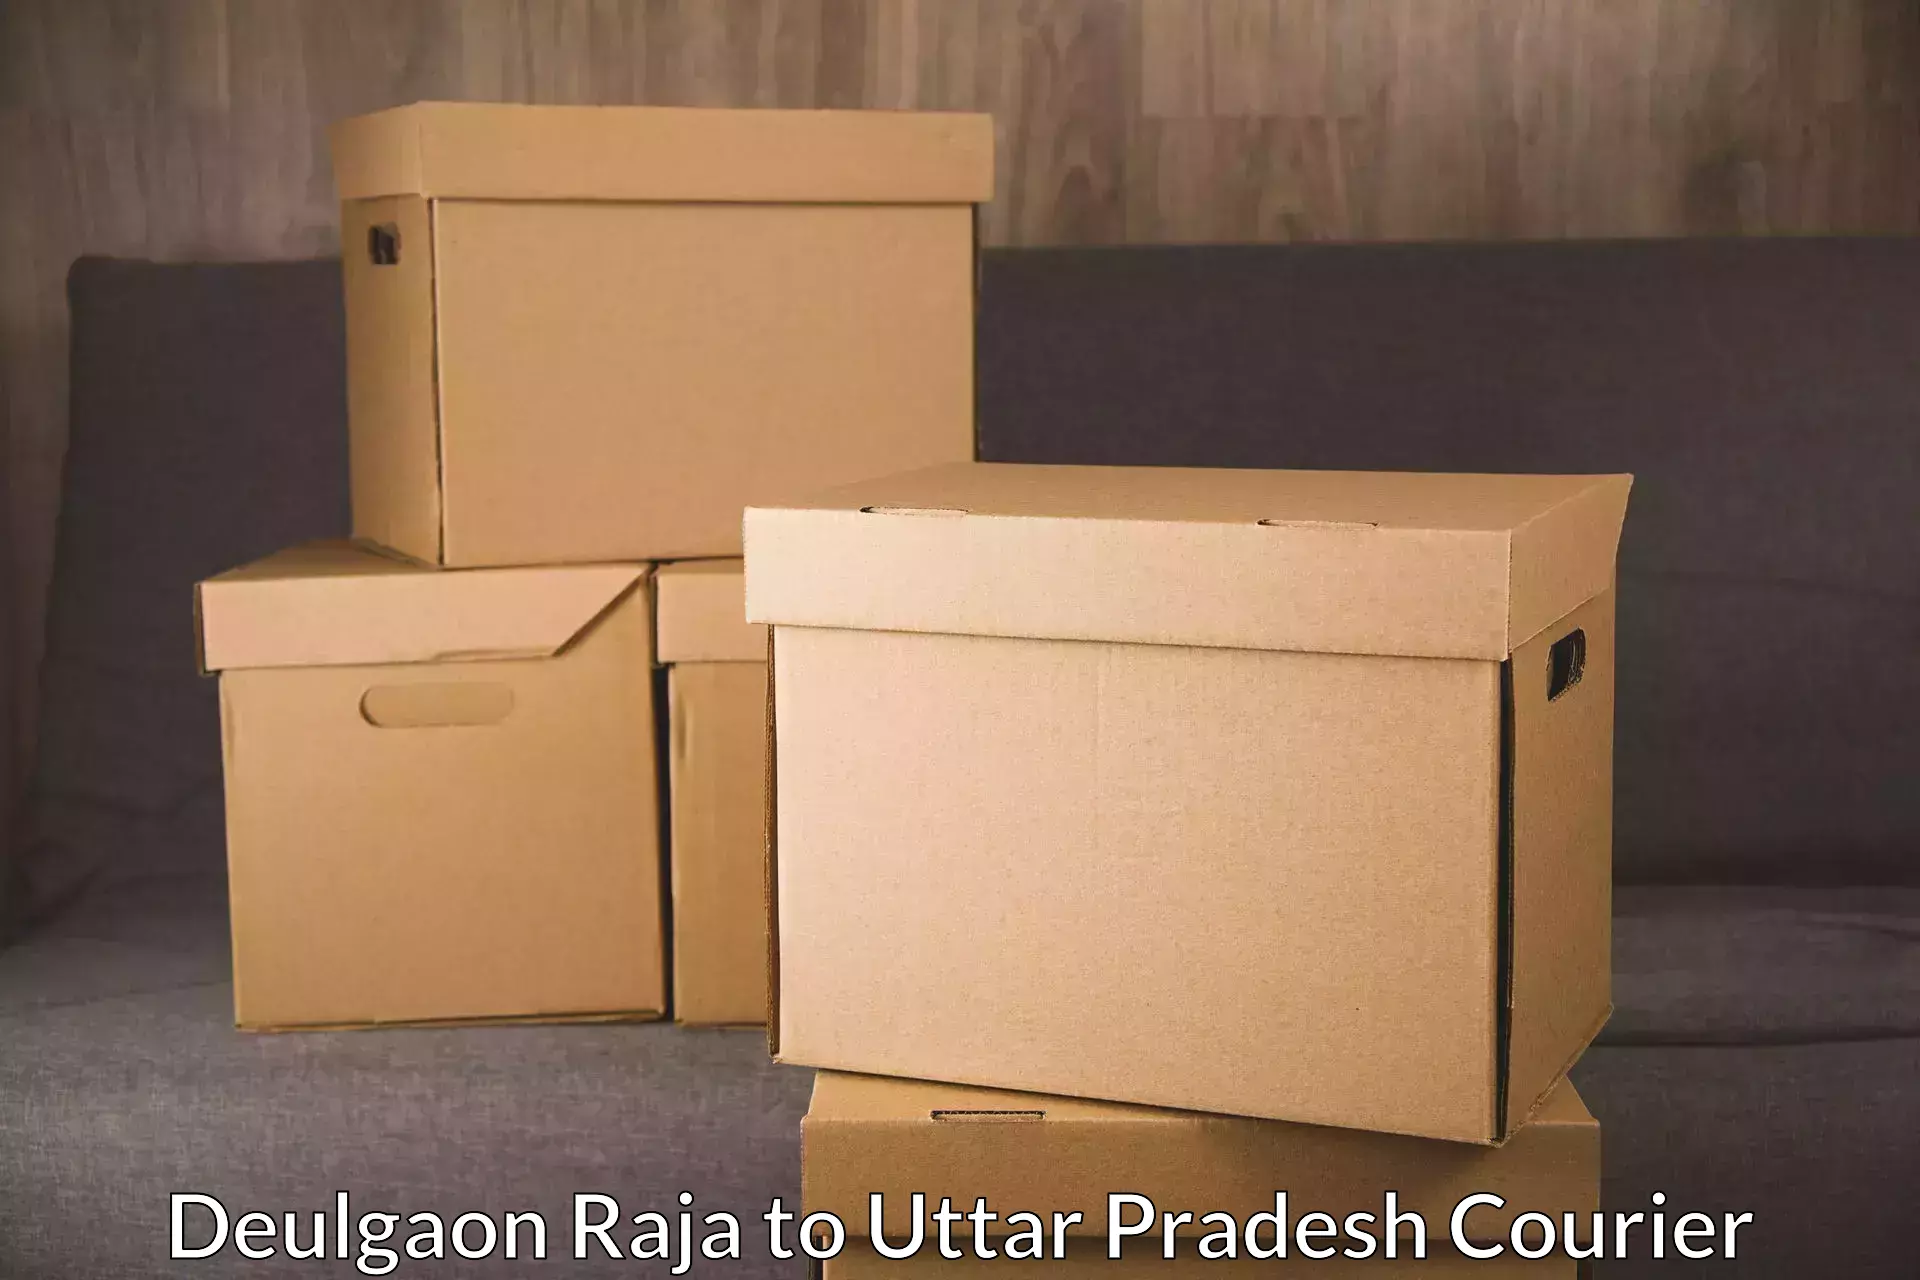 Automated shipping processes in Deulgaon Raja to Aligarh